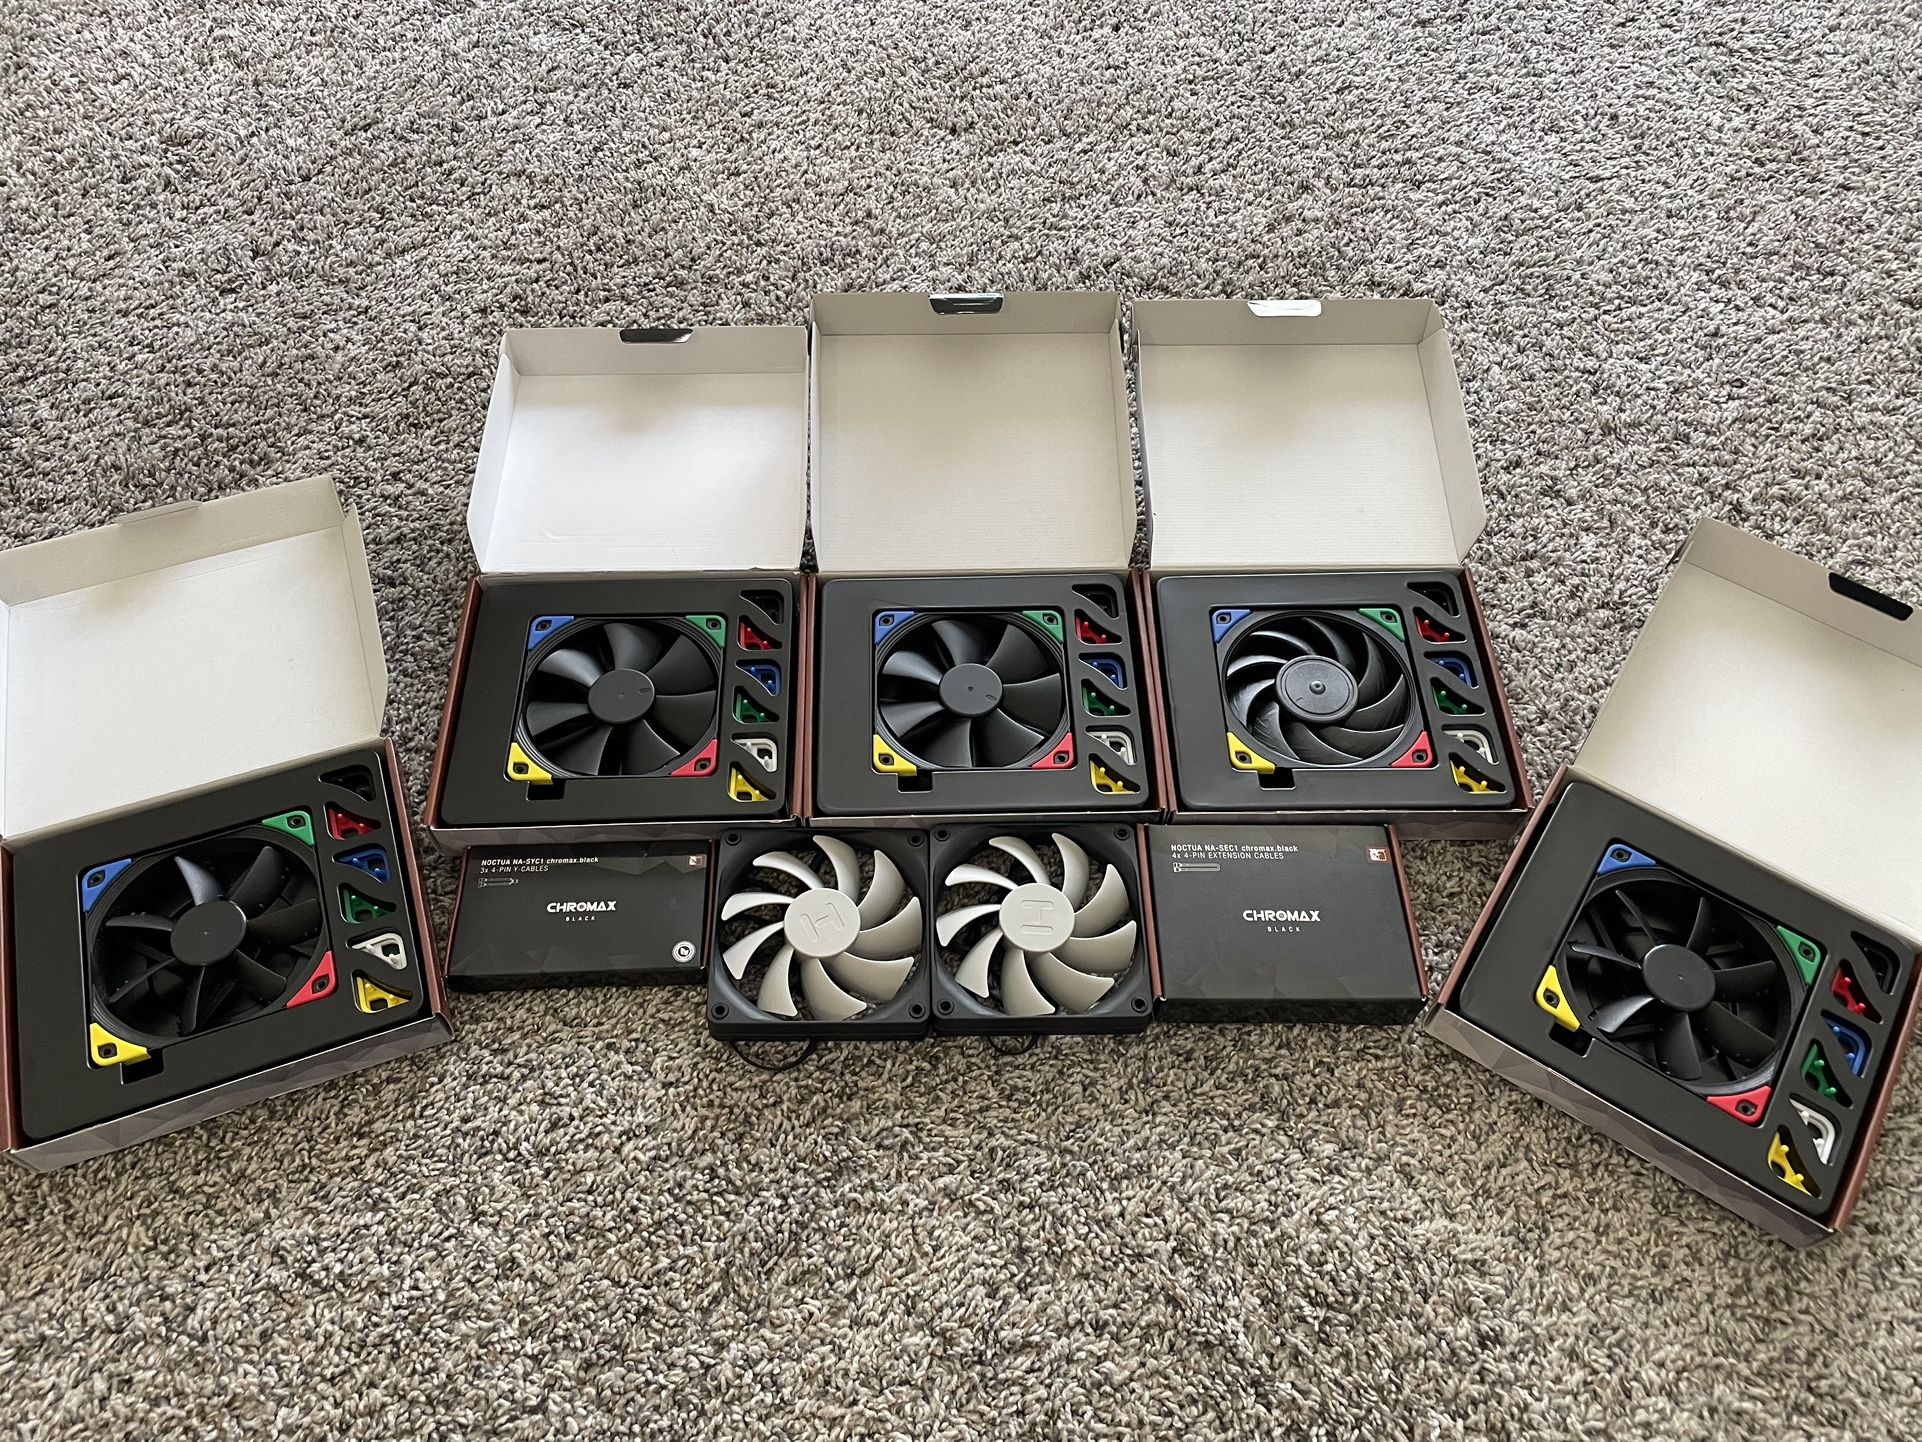 5 Noctua NF-F12 PWM PC fans 120mm & Other Items